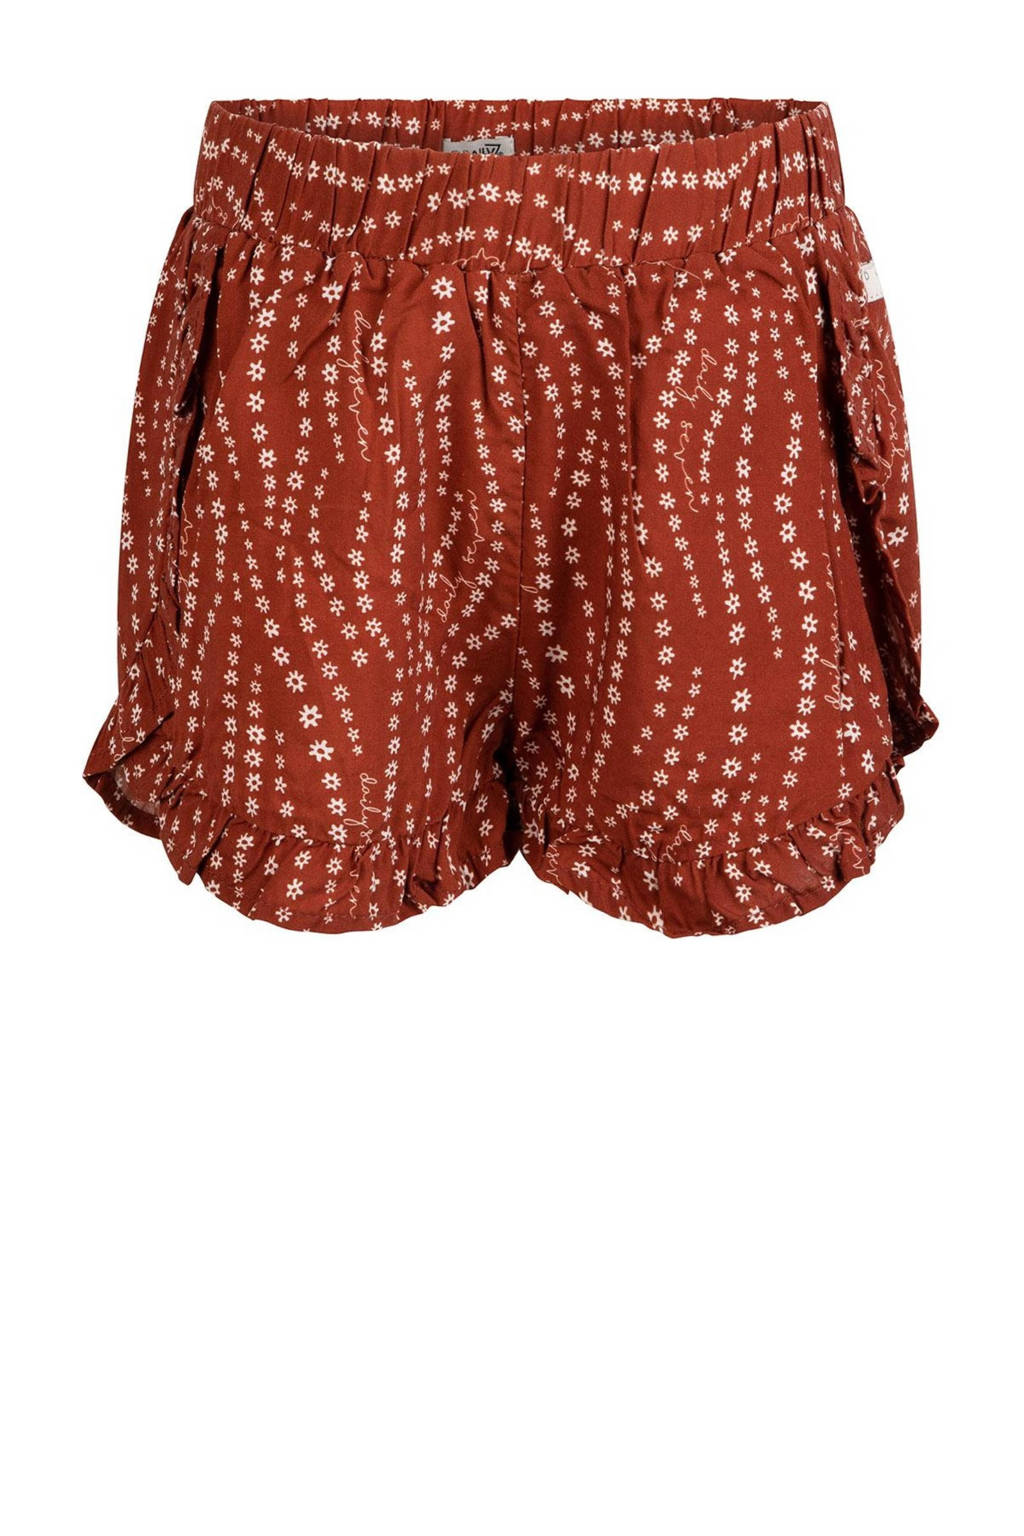 Daily7 short met all over print bruinrood/wit